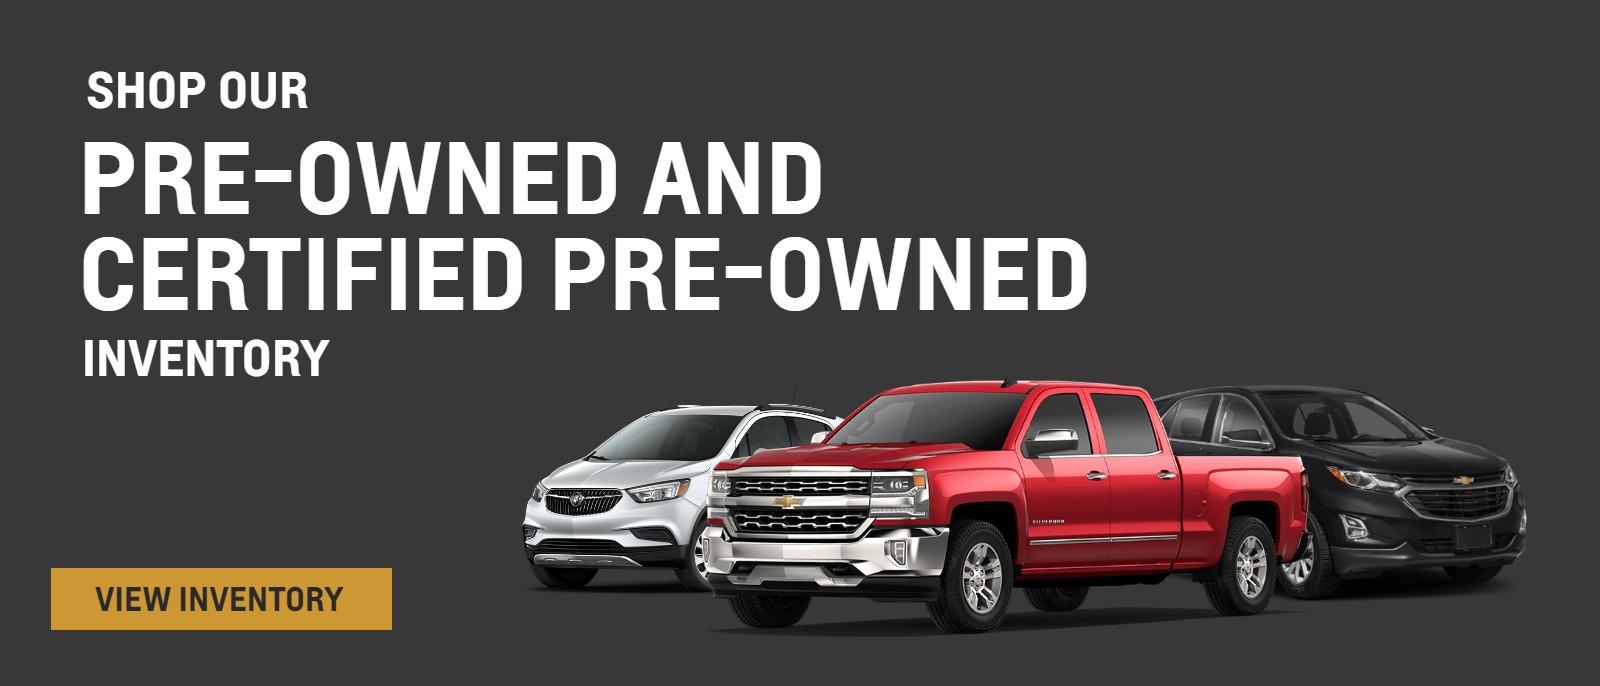 Shop Our Pre-Owned and Certified Pre-Owned Inventory!